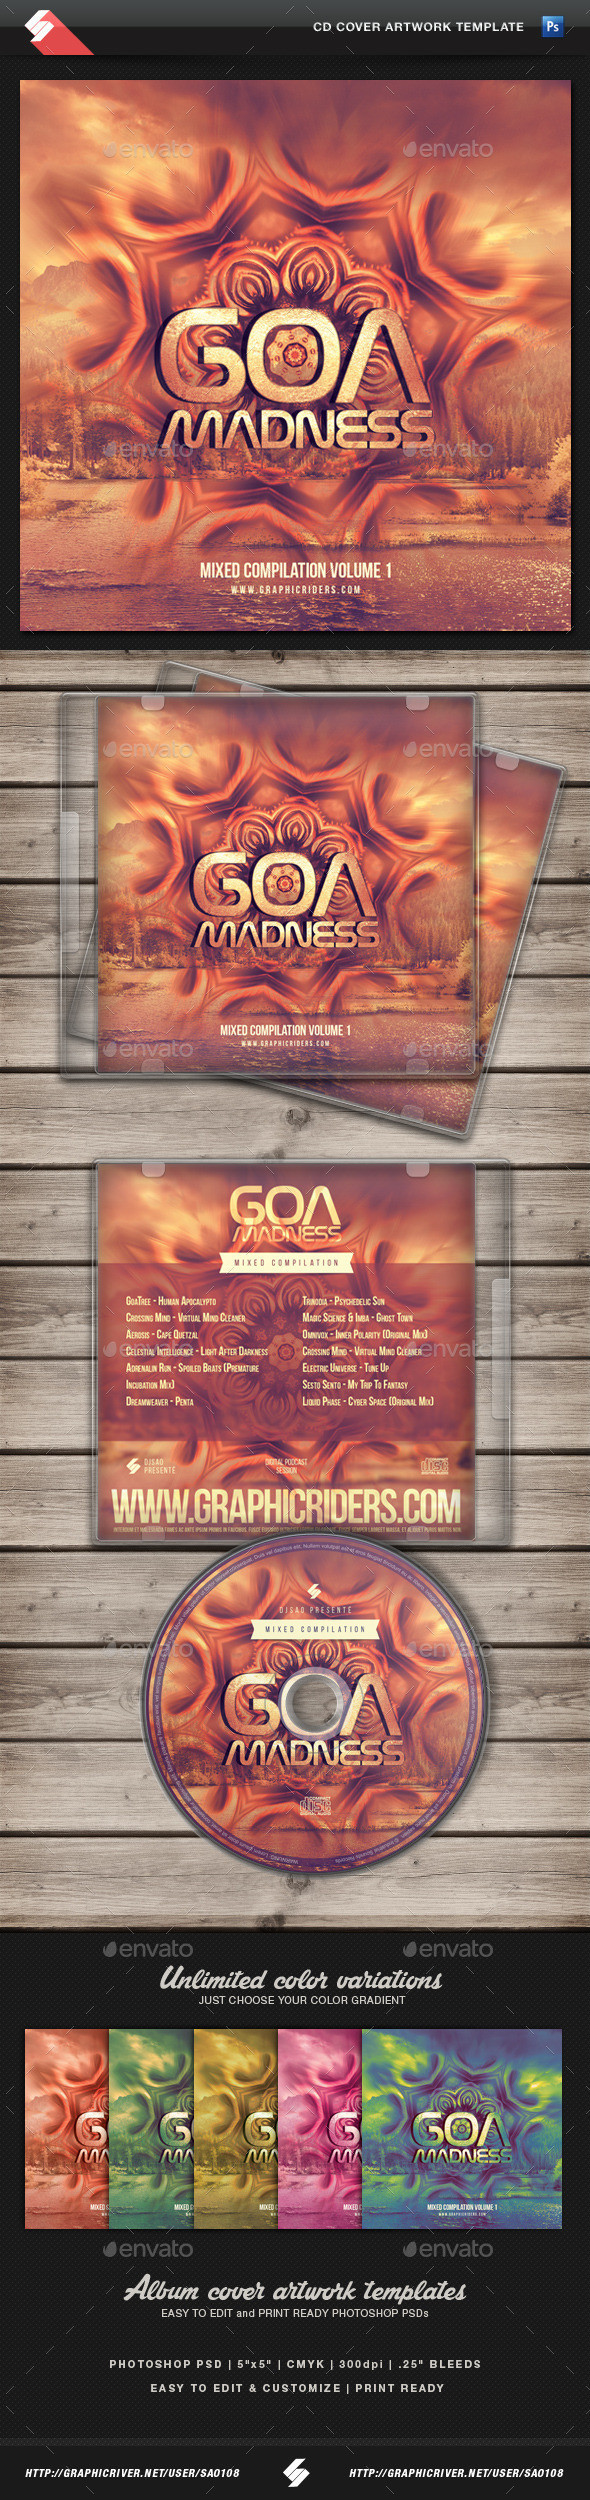 Goamadness cd cover template preview